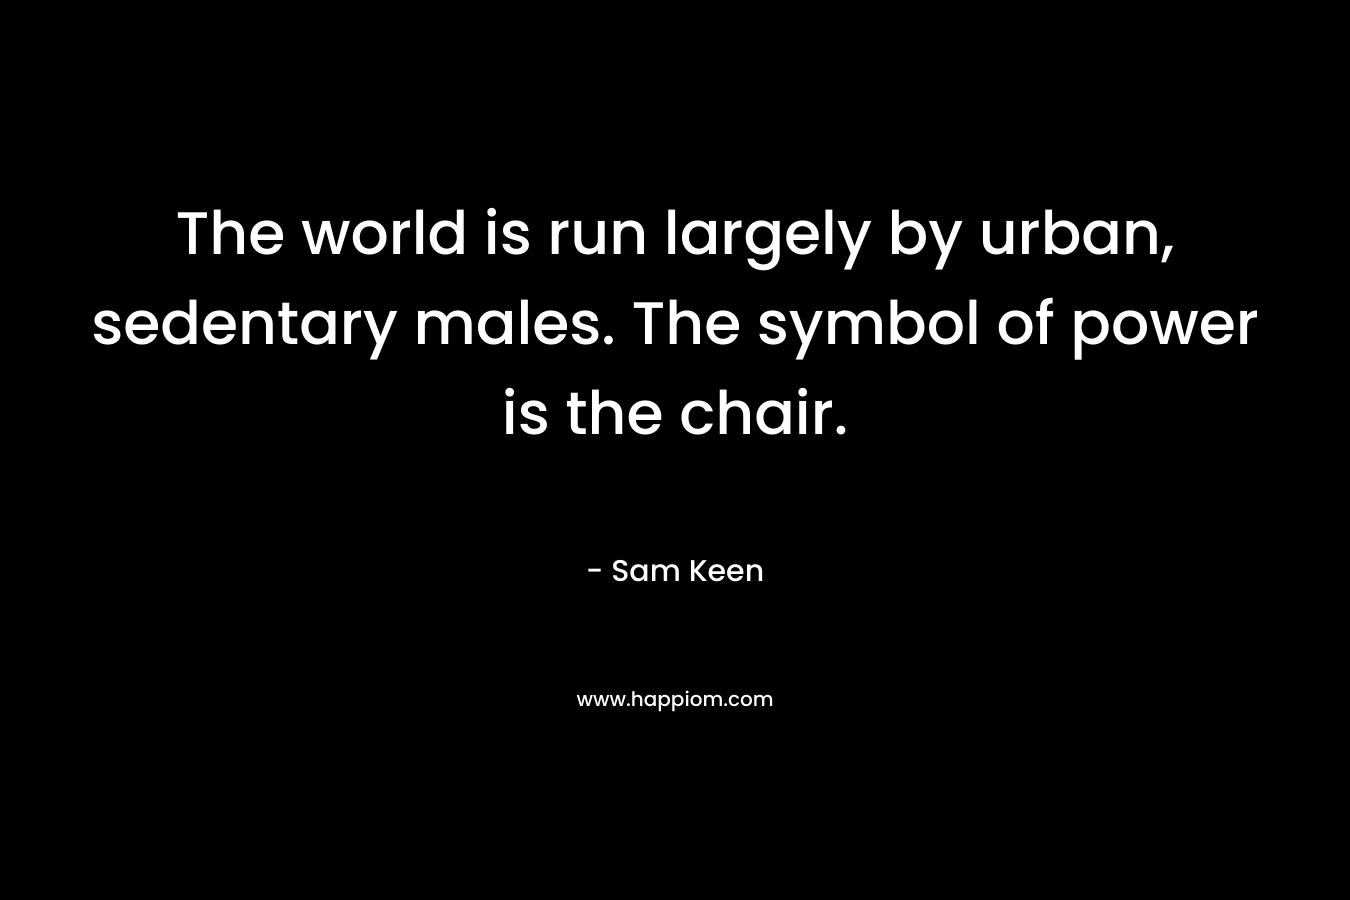 The world is run largely by urban, sedentary males. The symbol of power is the chair.